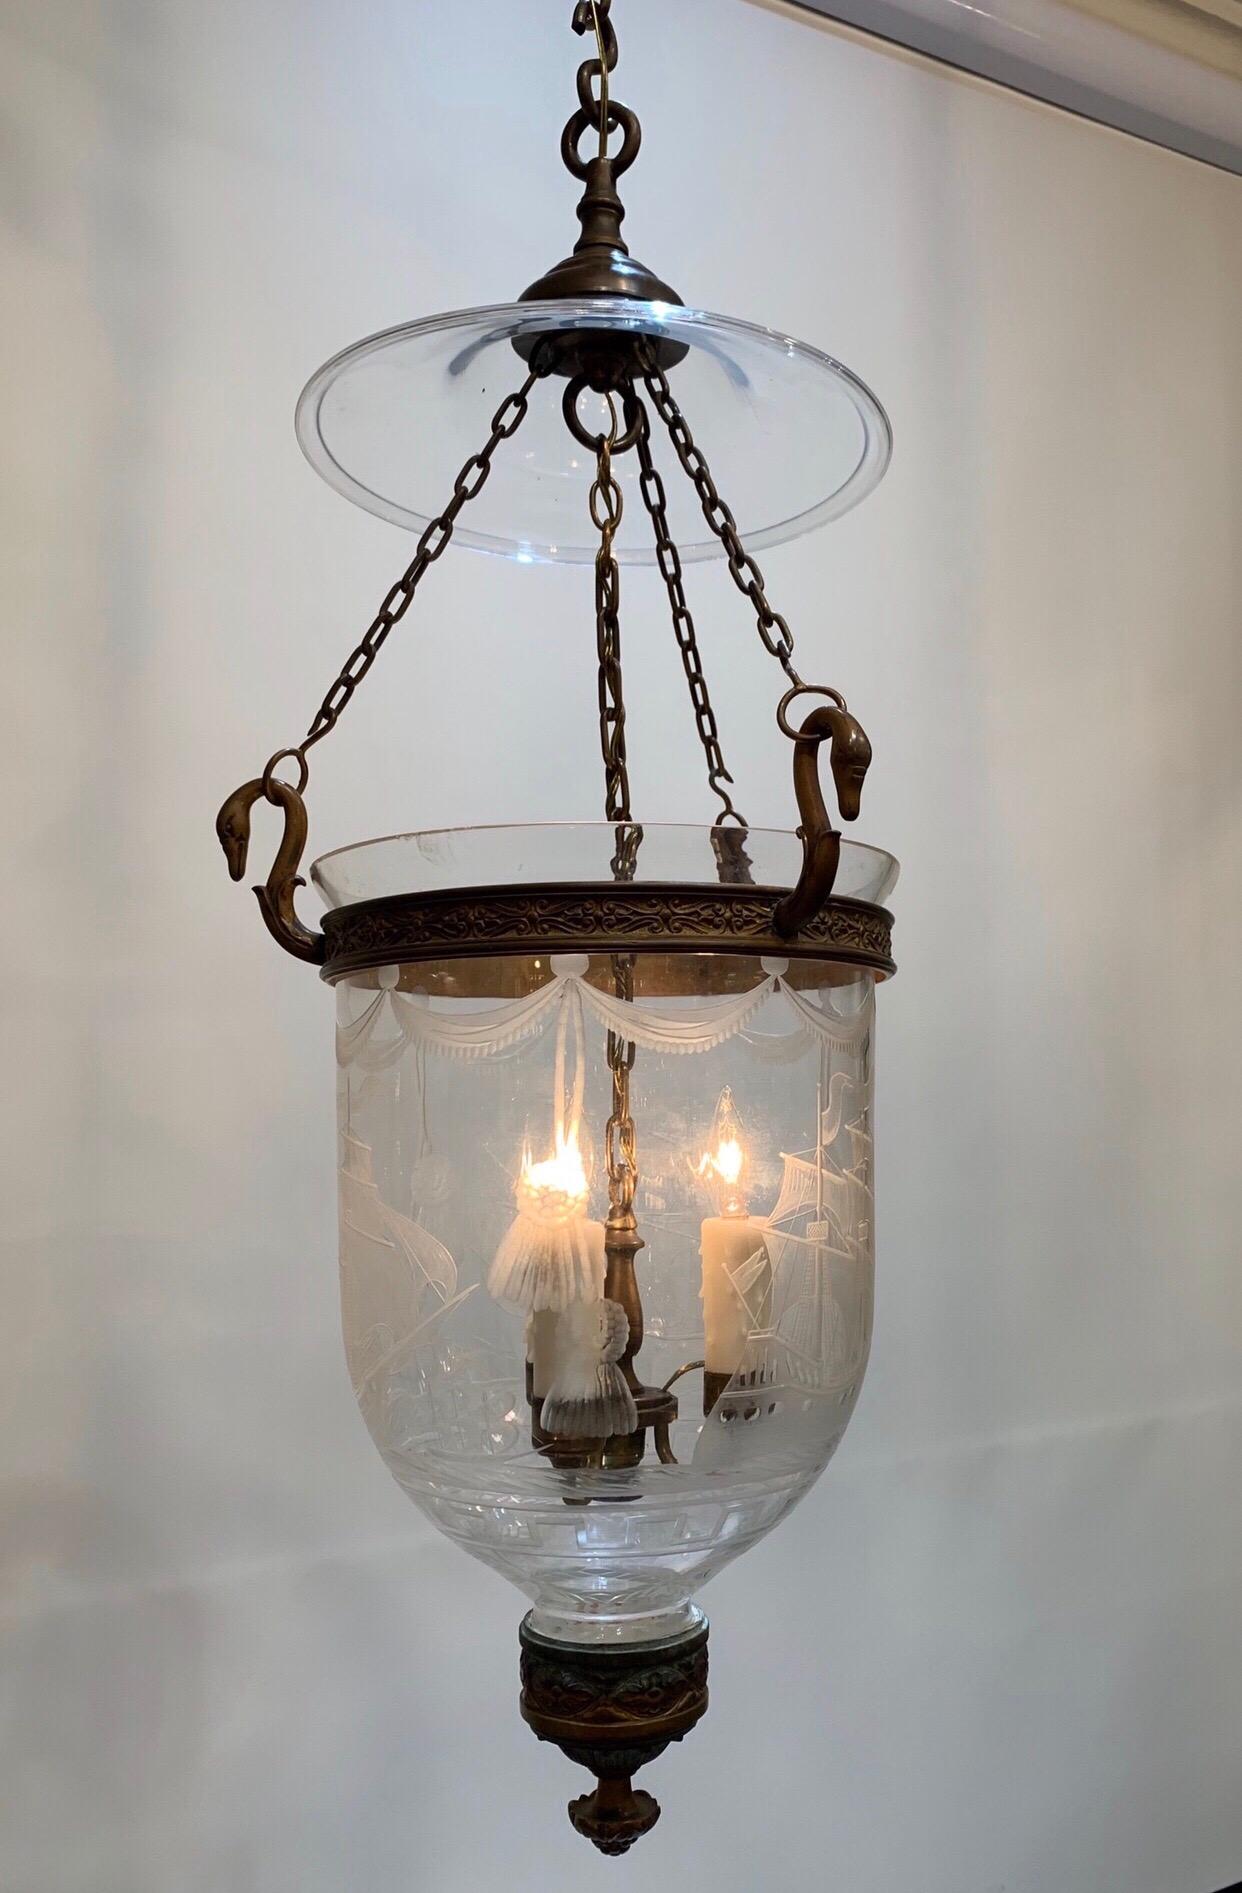 Federal 19th Century American Bell Jar Lantern Etched with Full Rigged Ships